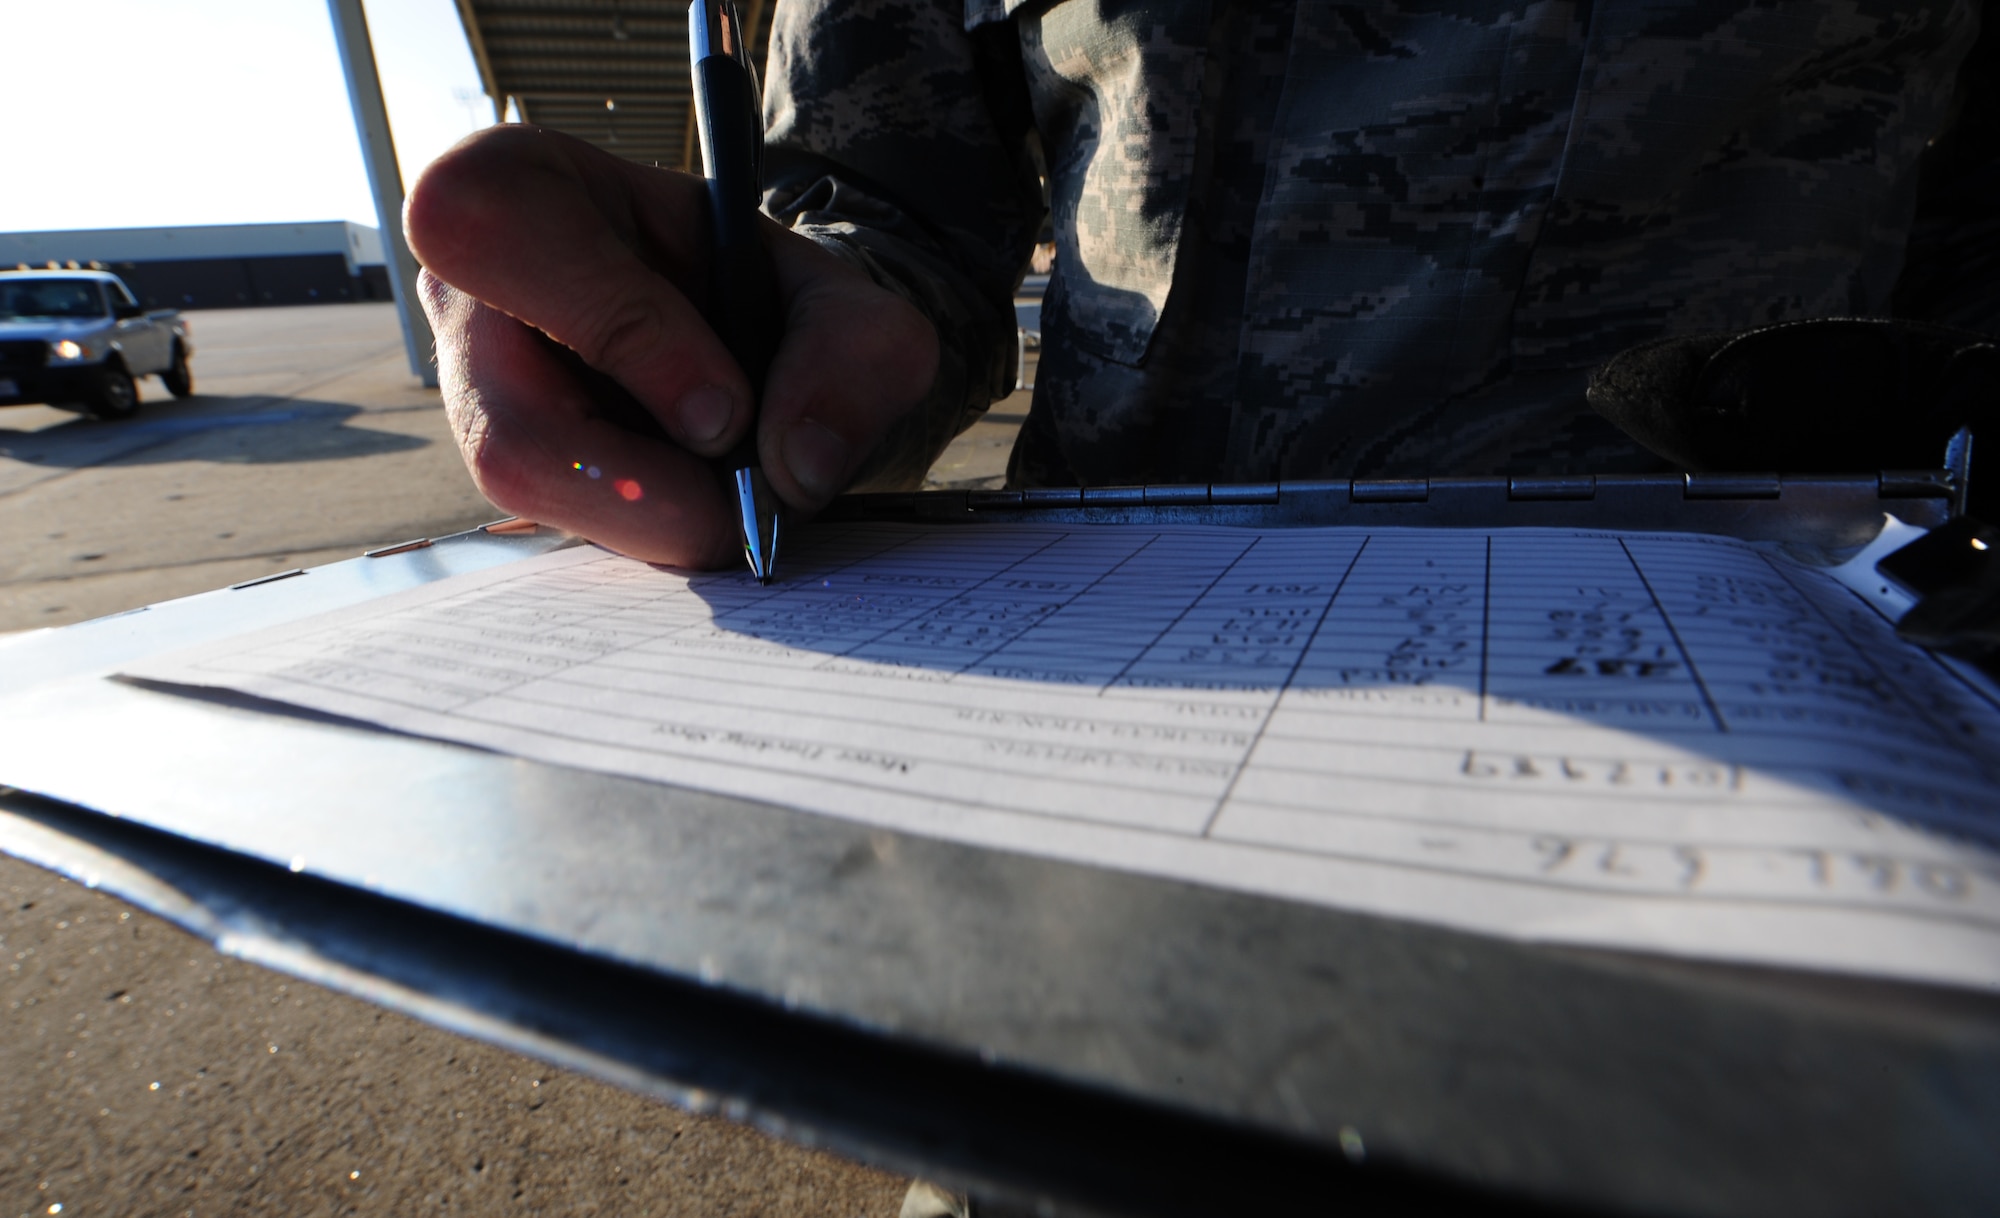 U.S. Air Force Airman 1st Class Jacob McSheffrey, a 509th Logistics Readiness Squadron fuels distribution operator, fills out an Air Force Form 1998, fuels billing transaction, at Whiteman Air Force Base, Mo., Nov. 3, 2015. This process ensures the appropriate agencies are billed for the fuels issued. (U.S. Air Force photo by Senior Airman Keenan Berry)